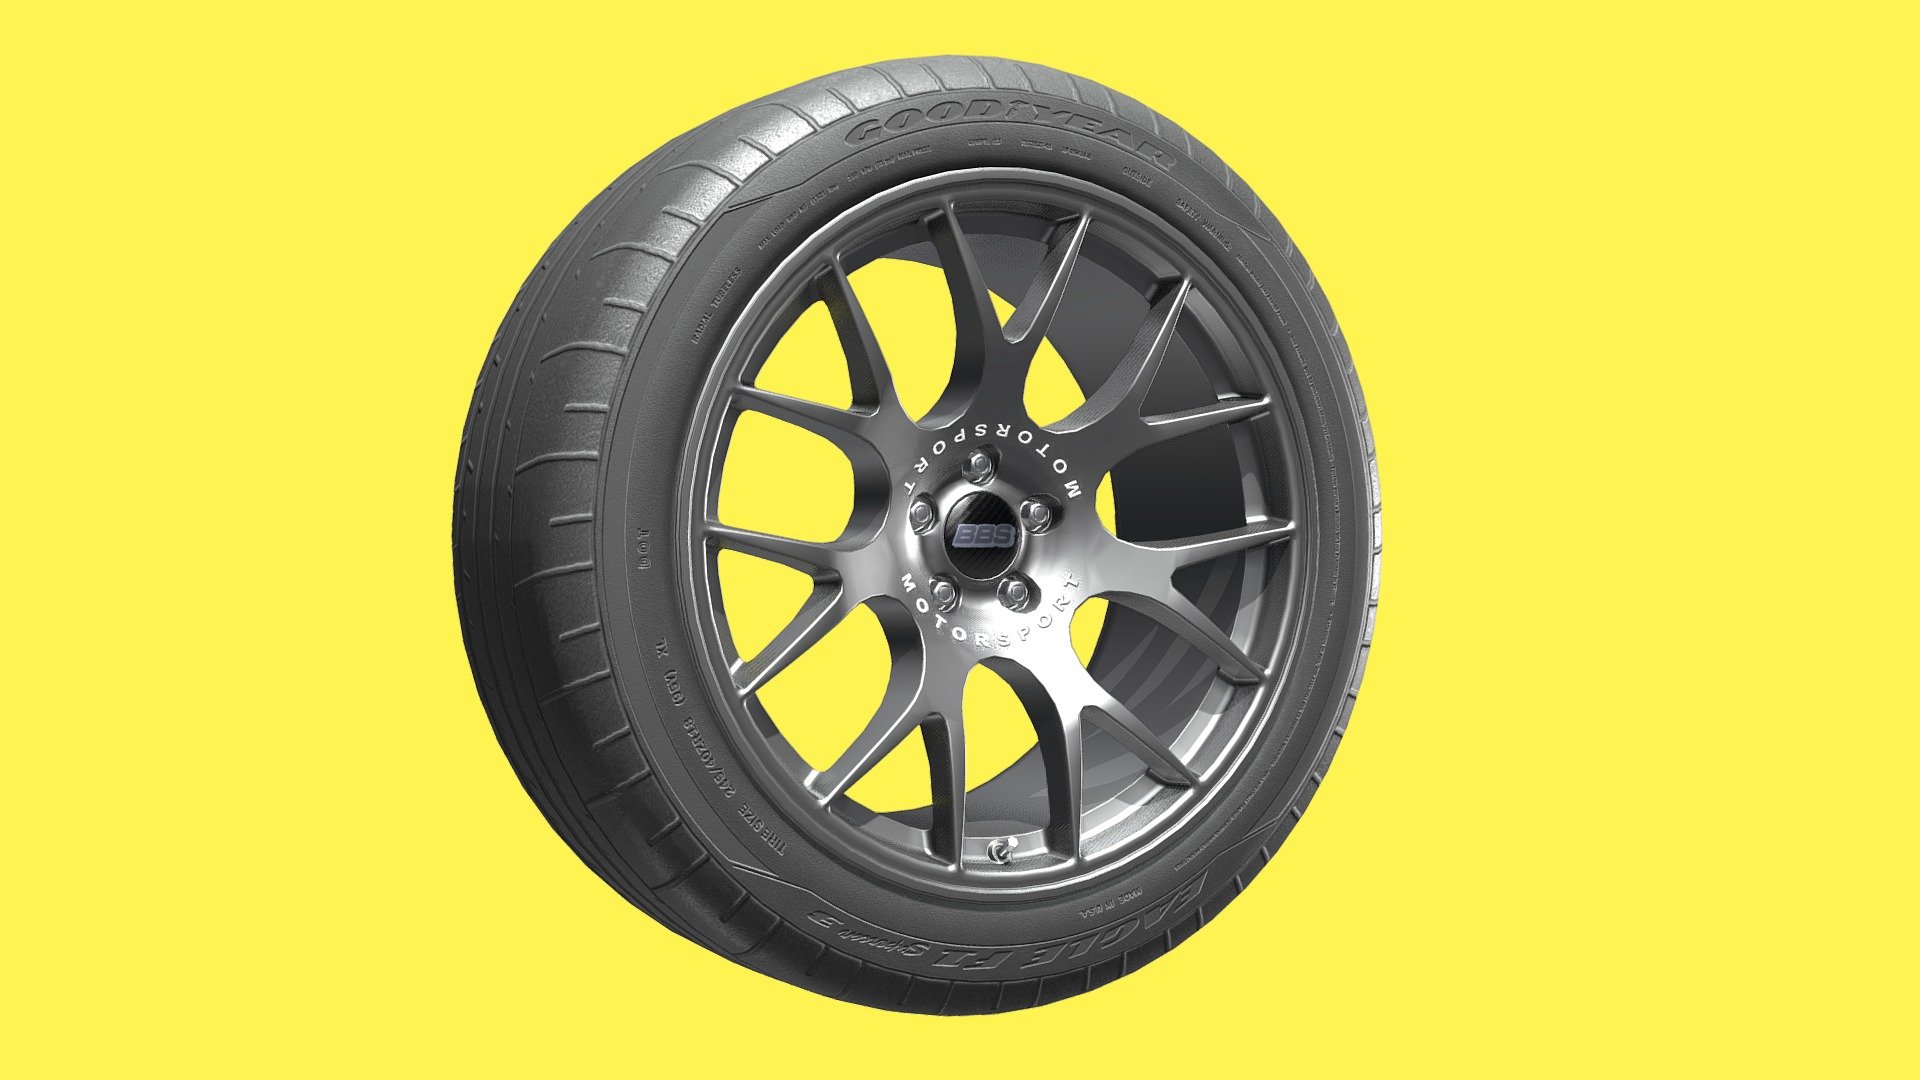 A special of 5 year on Sketchfab of 3D low poly model of BBS CH-R rim with Goodyear Eagle F1 Supercar 3 Tire.

Free under CC Attribution 3d model